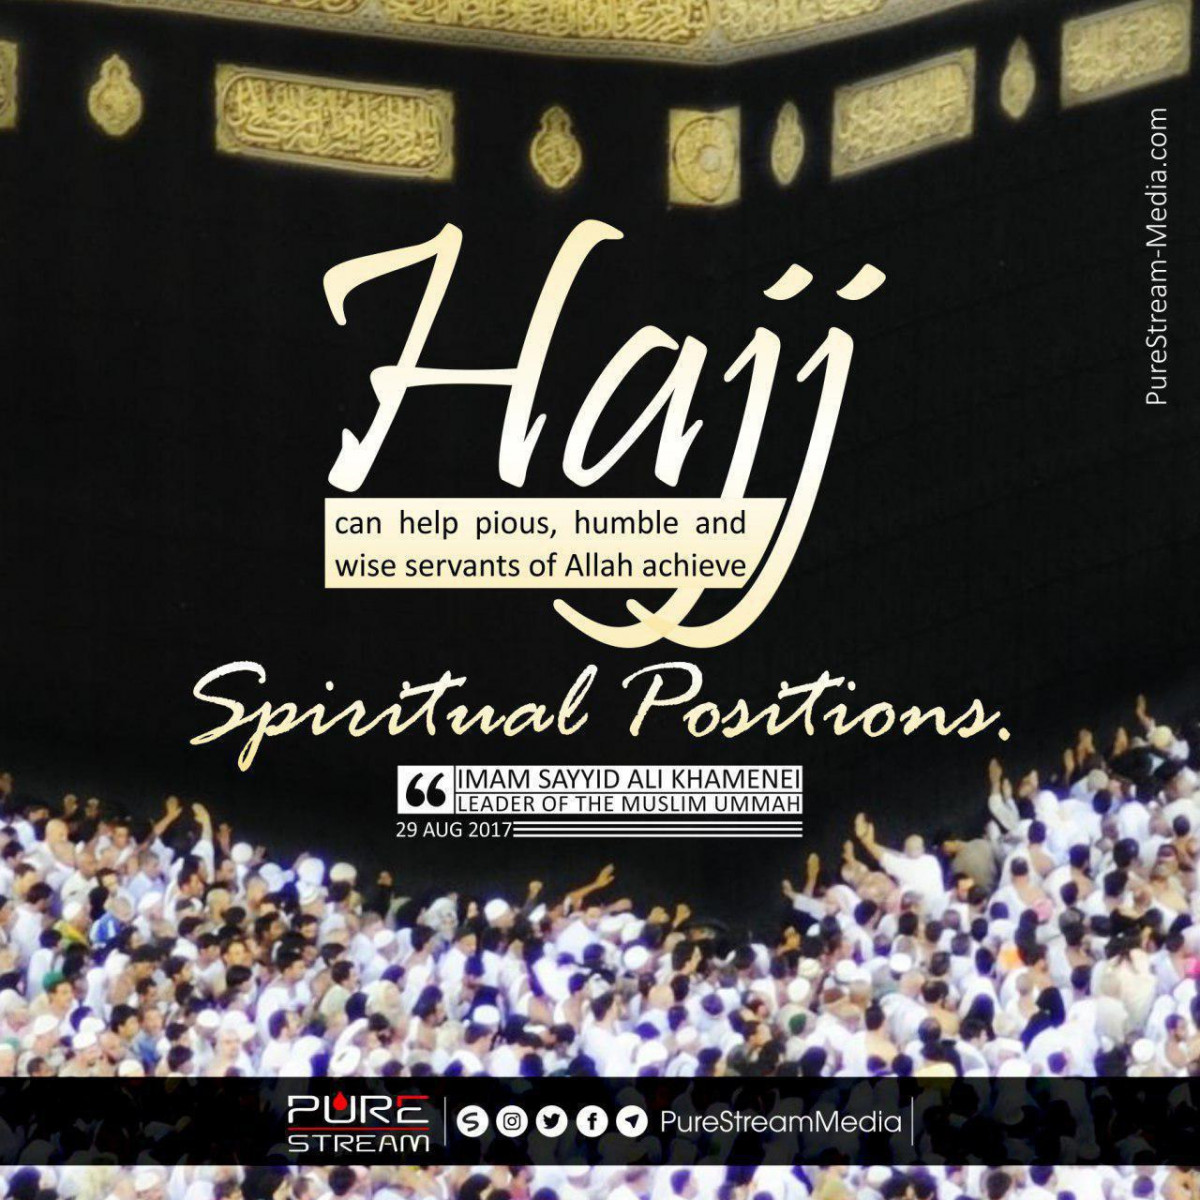 "Hajj can help pious, humble and wise servants of God achieve spiritual positions."